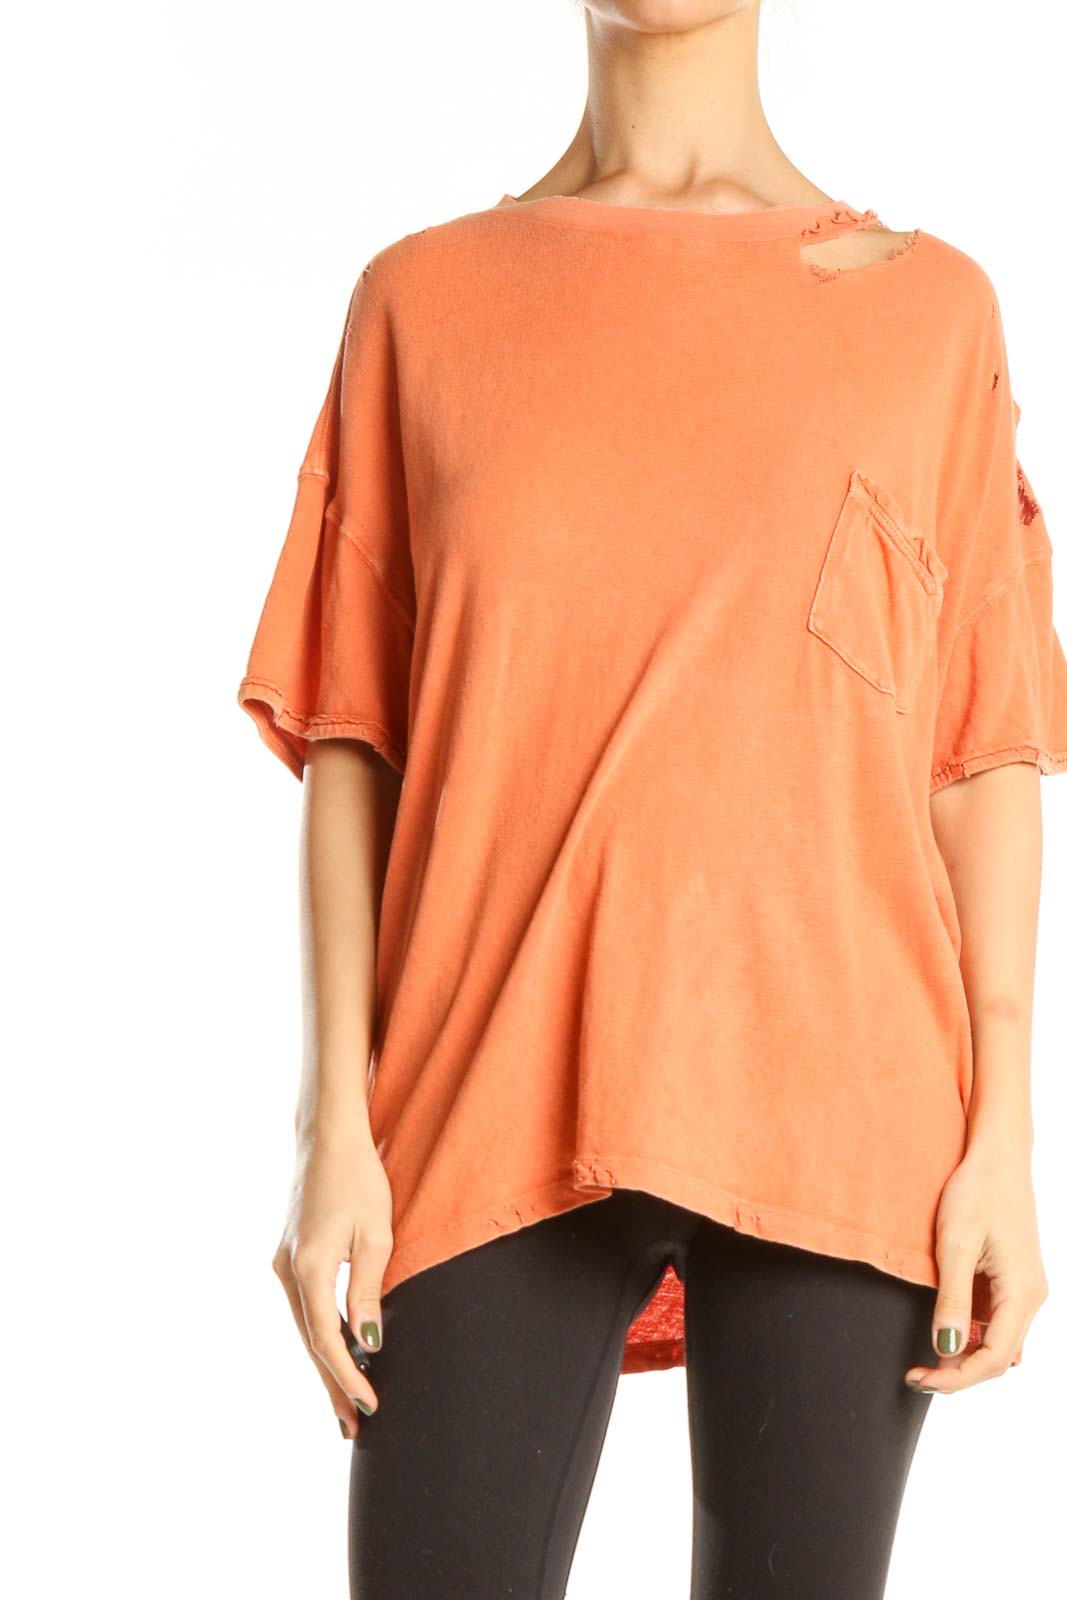 Orange Distressed Casual Top Front